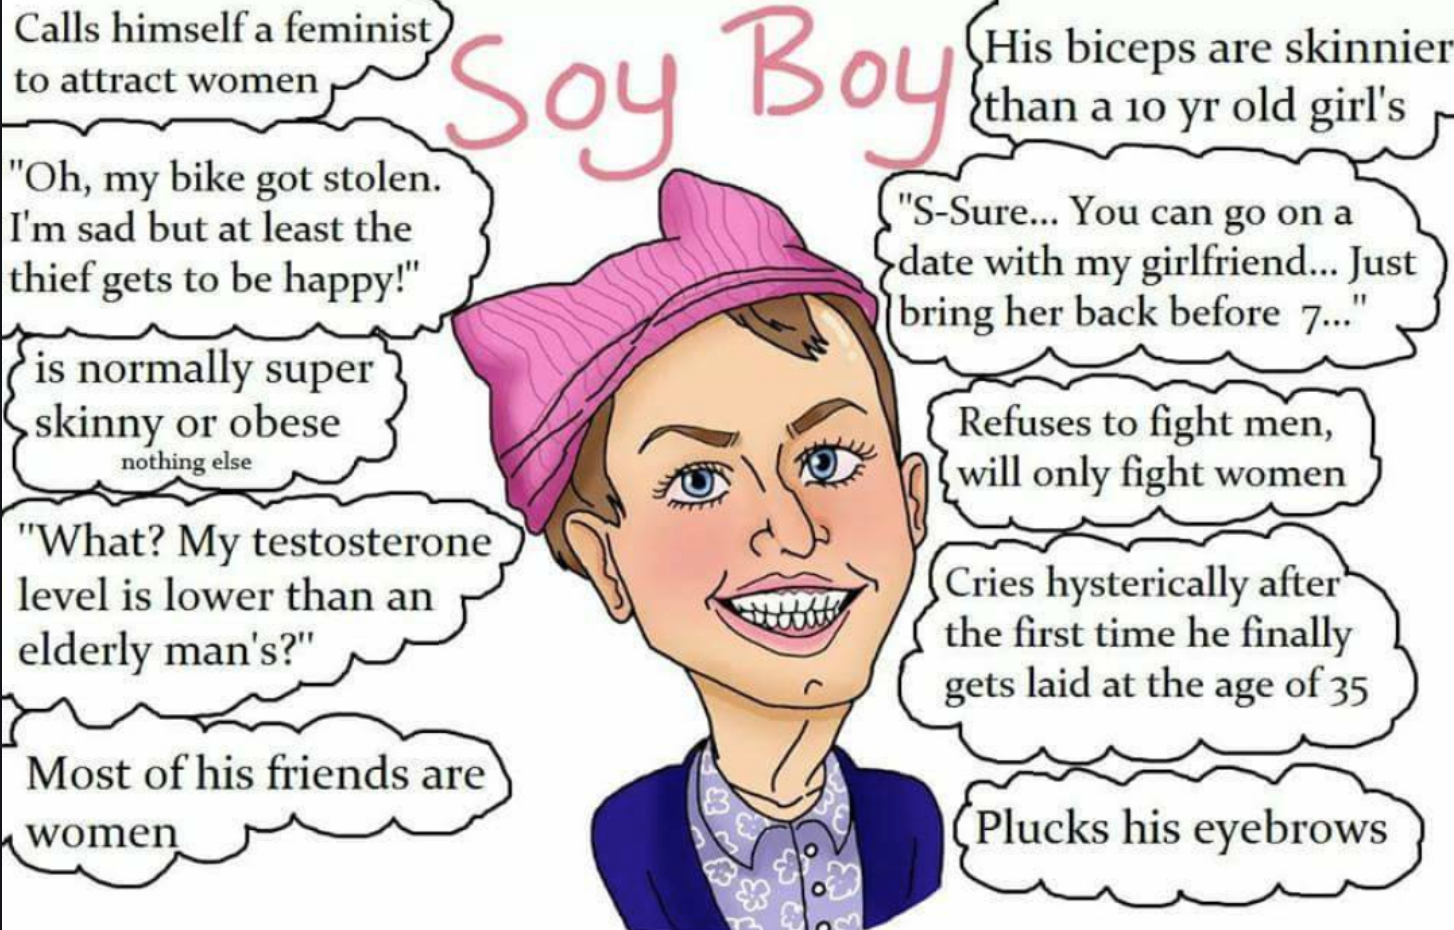 soyboy.png